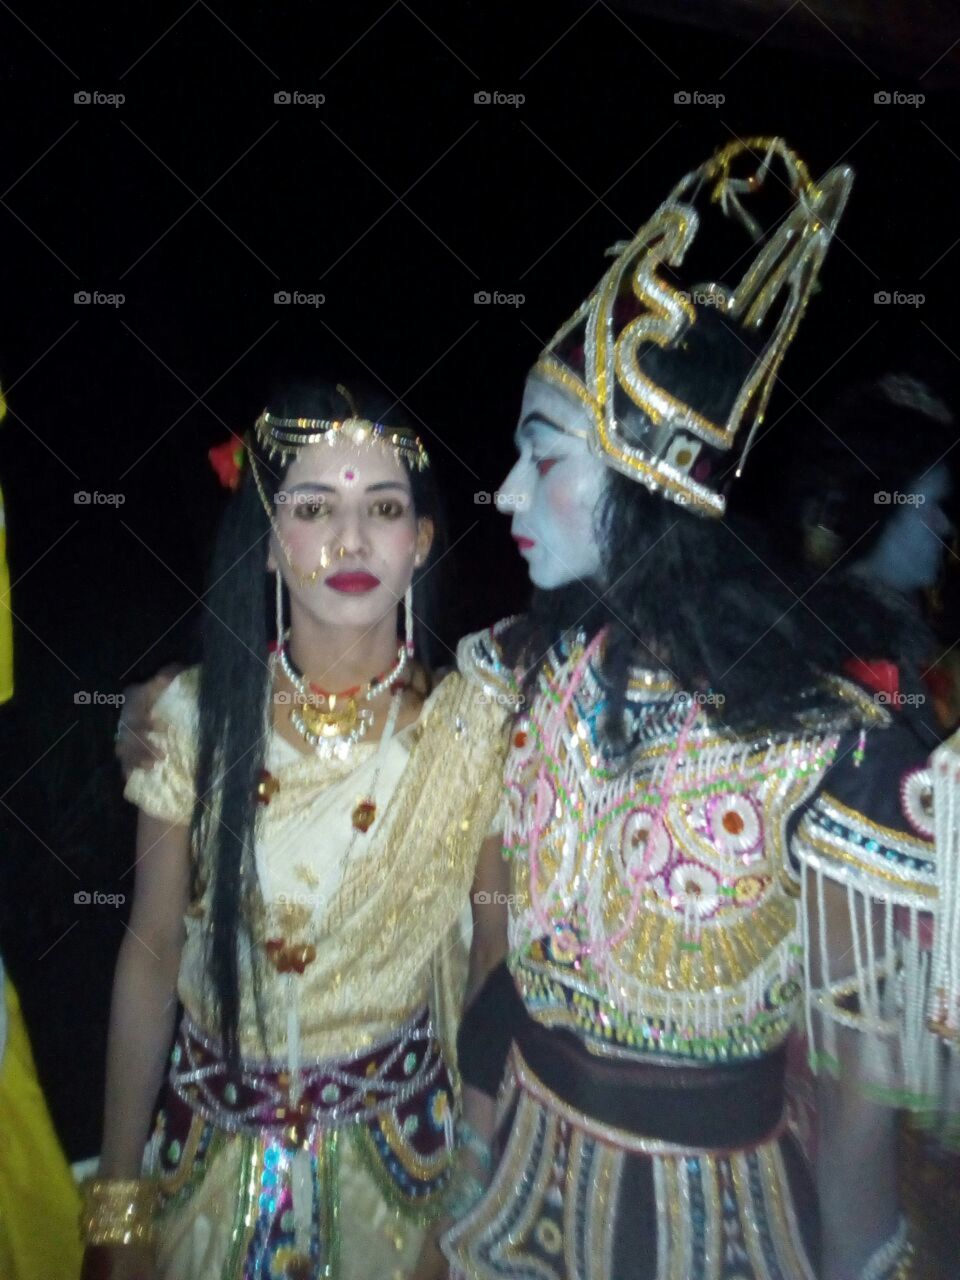 Artists in Assamese religious cultural play